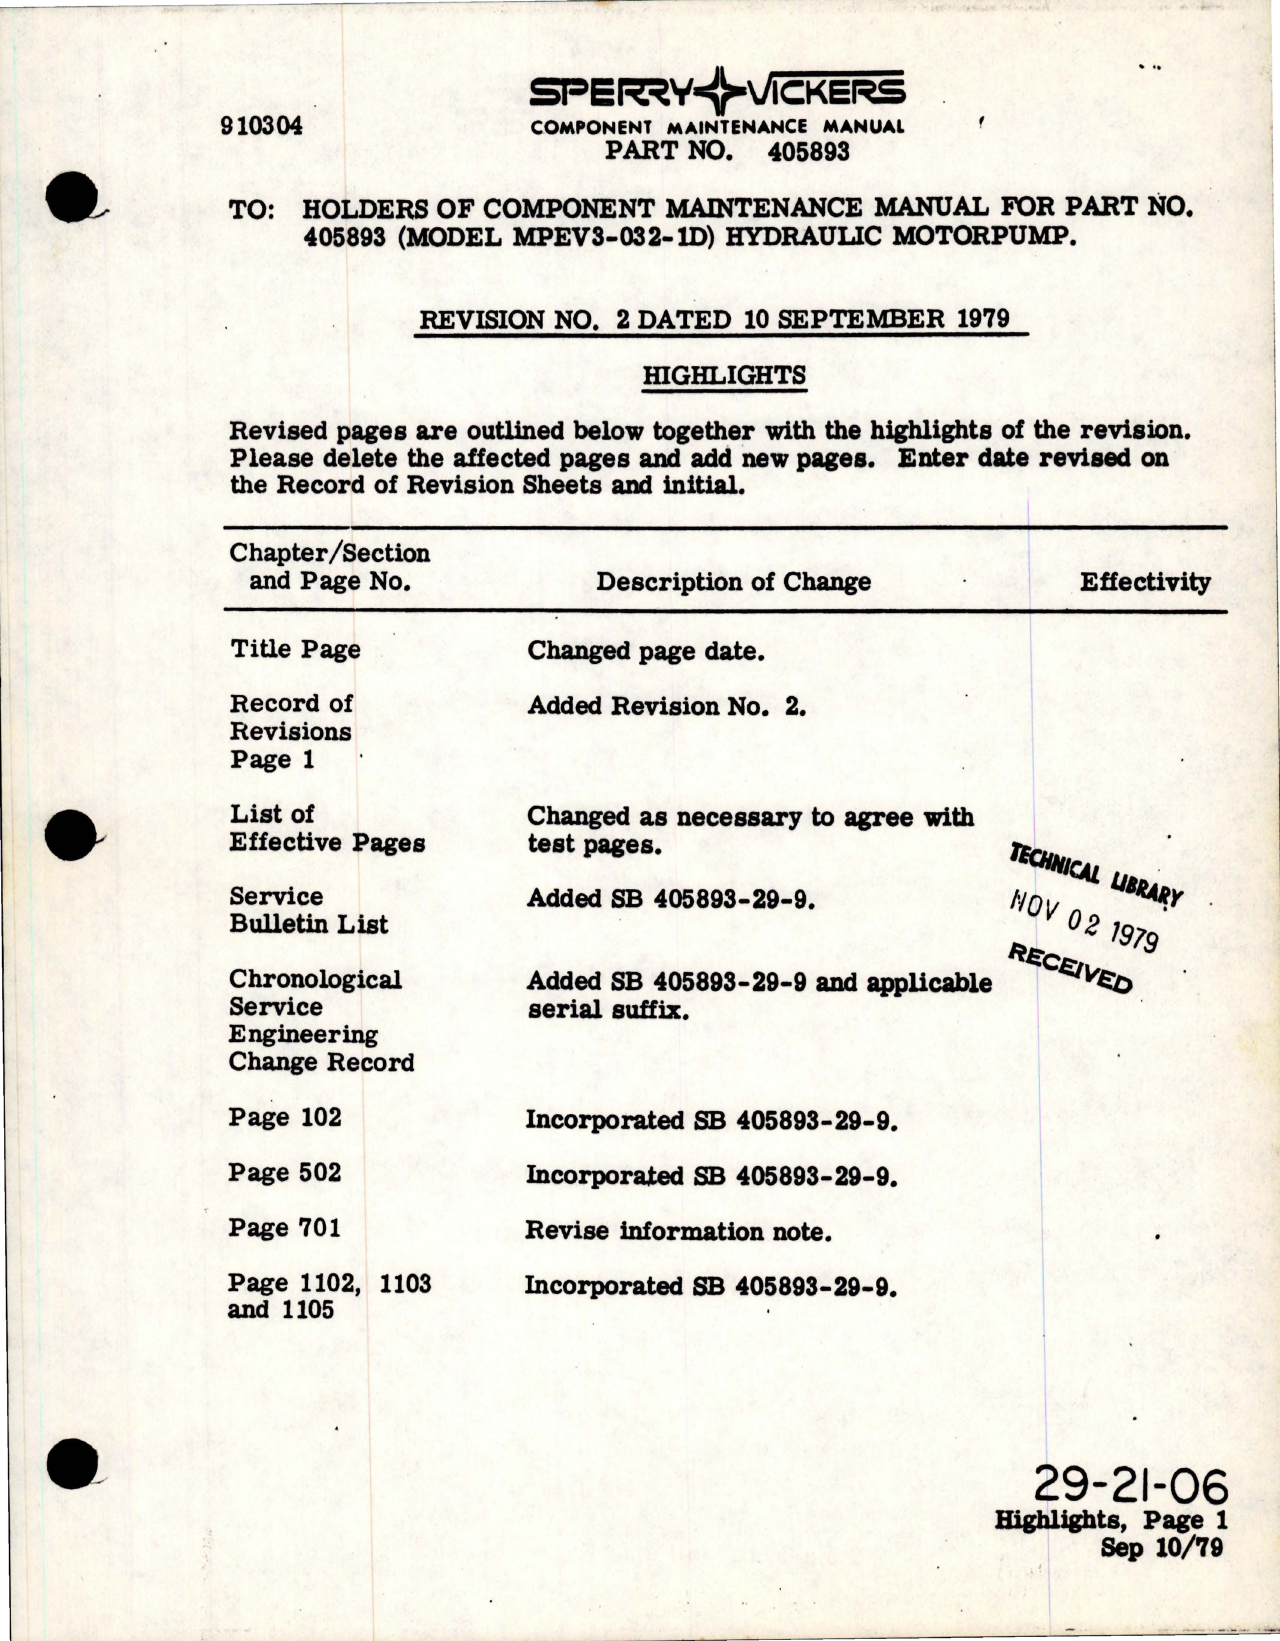 Sample page 1 from AirCorps Library document: Component Maintenance Manuals for Hydraulic Motorpump - Parts 405893 and 414470 -  Revision No. 2